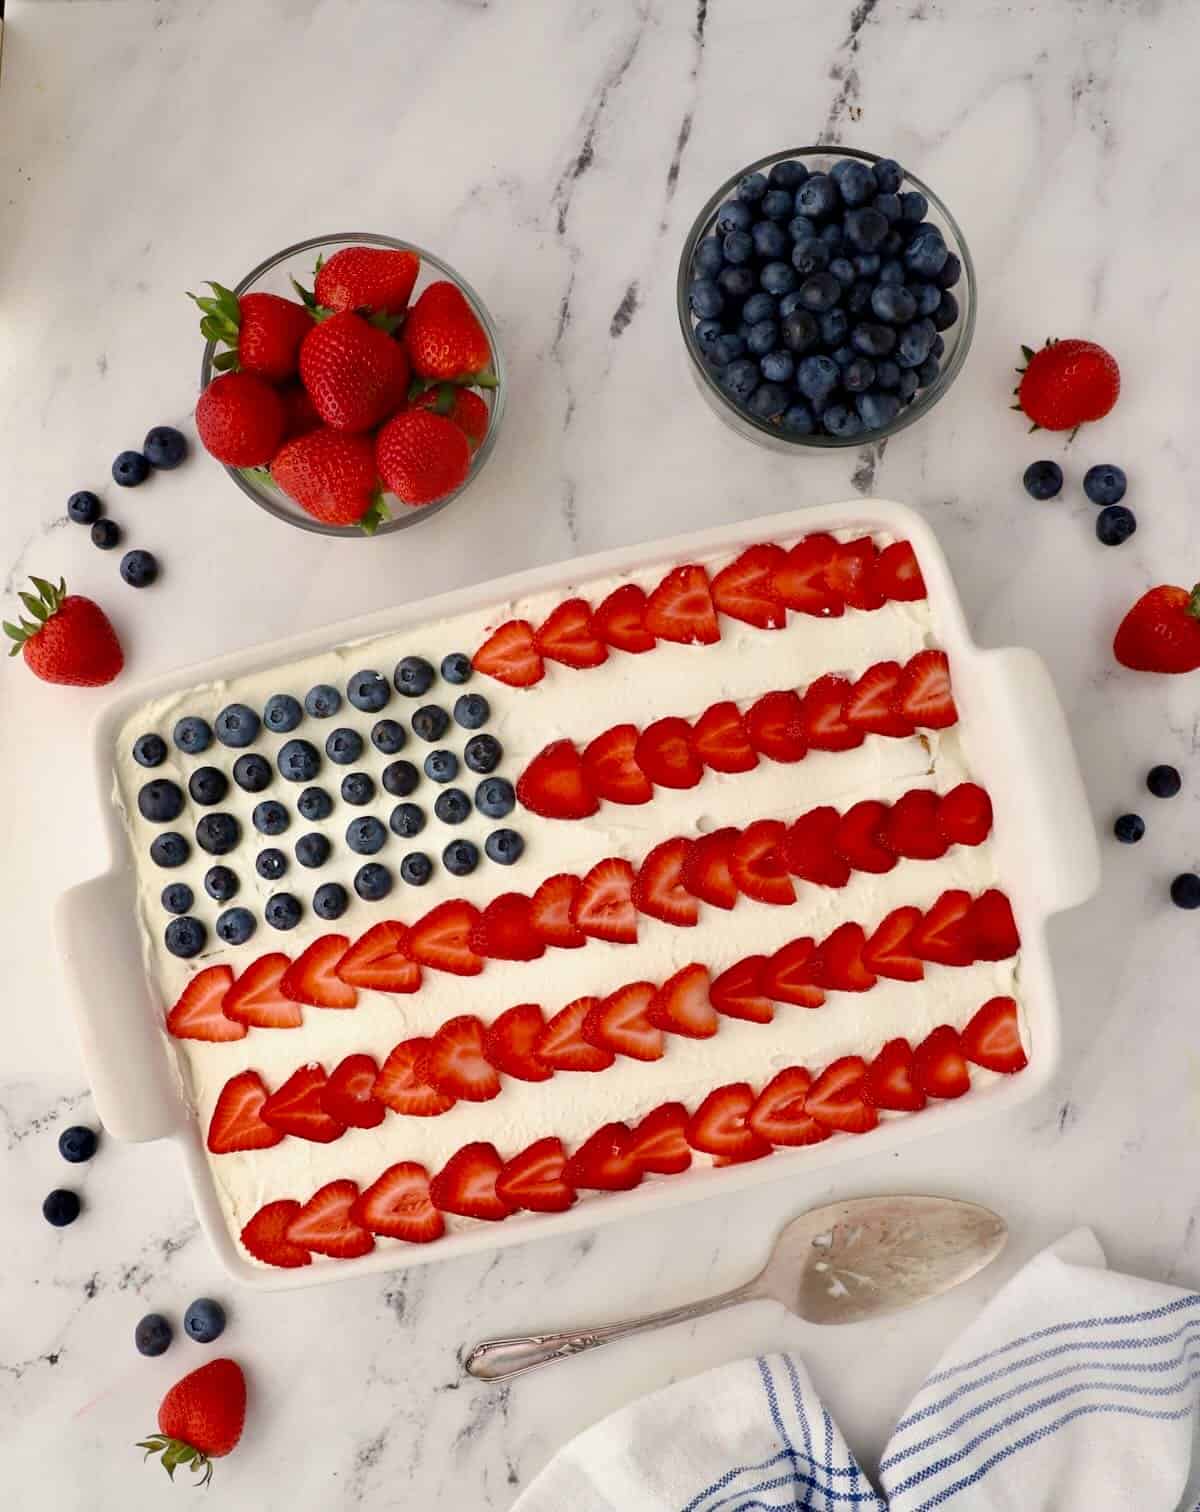 An icebox cake decorated like a flag for the 4th of July.